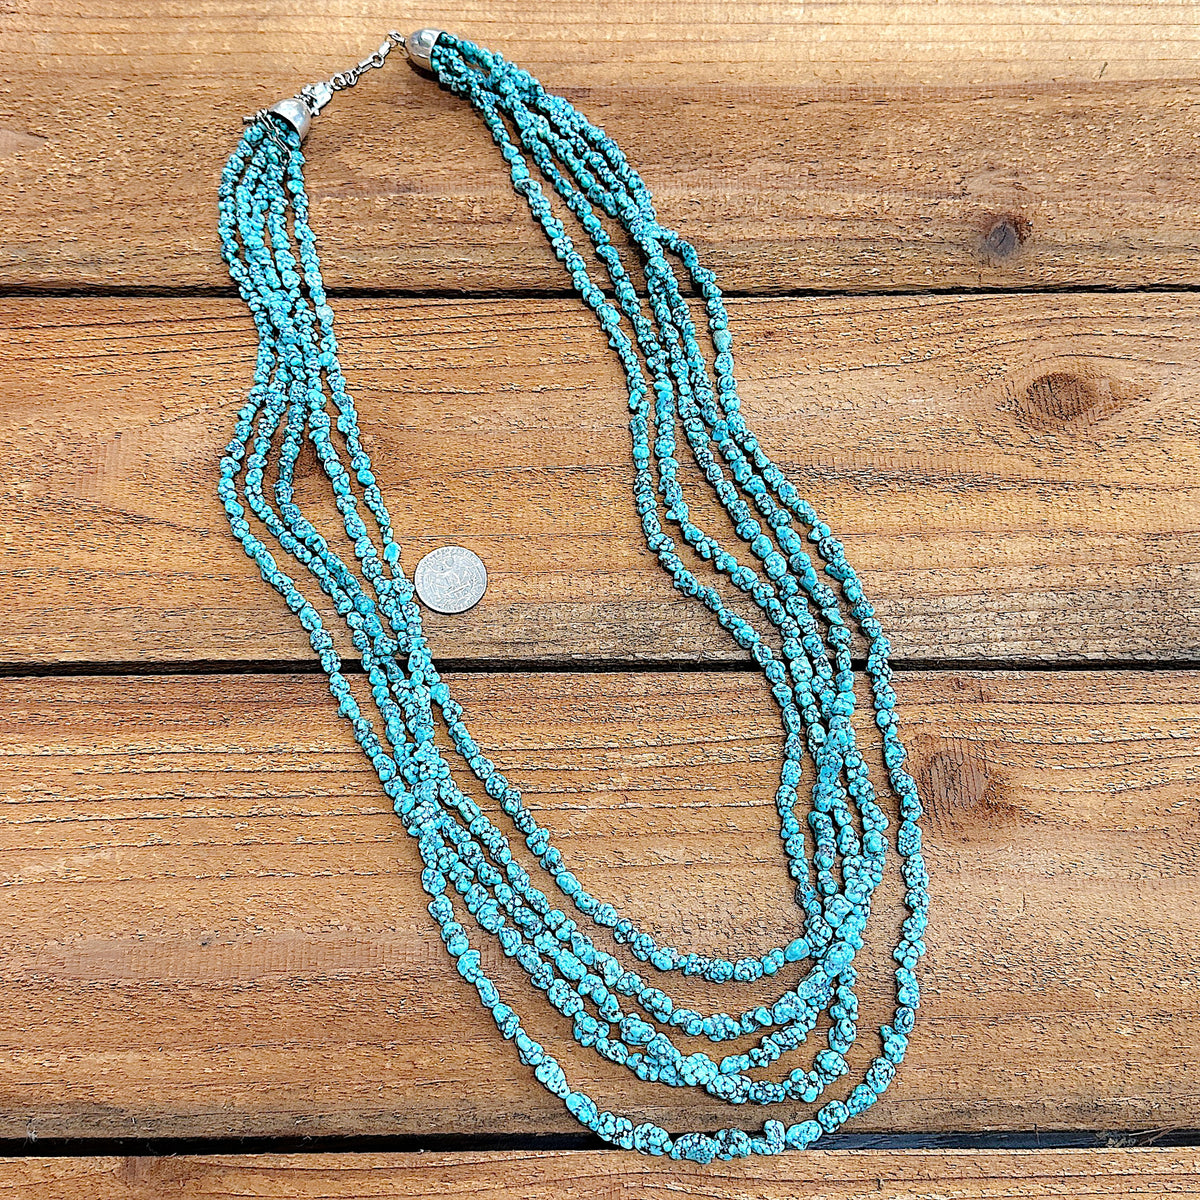 Size comparison of a 36" long Kingman Turquoise necklace that features natural freeform Turquoise nuggets.